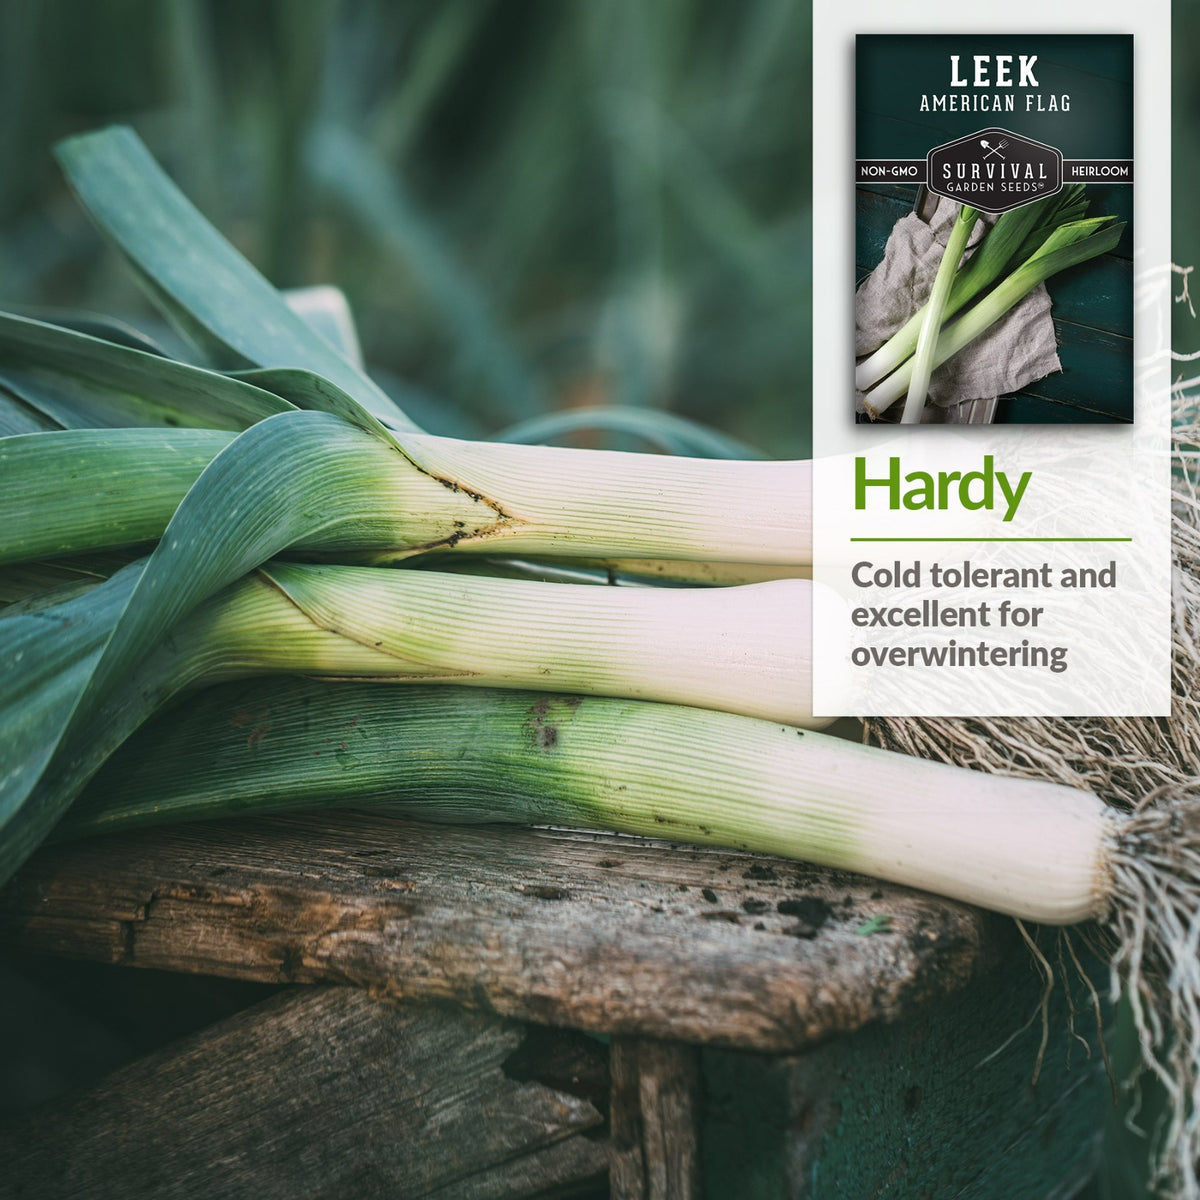 American Flag Leeks are hardy and cold tolerant